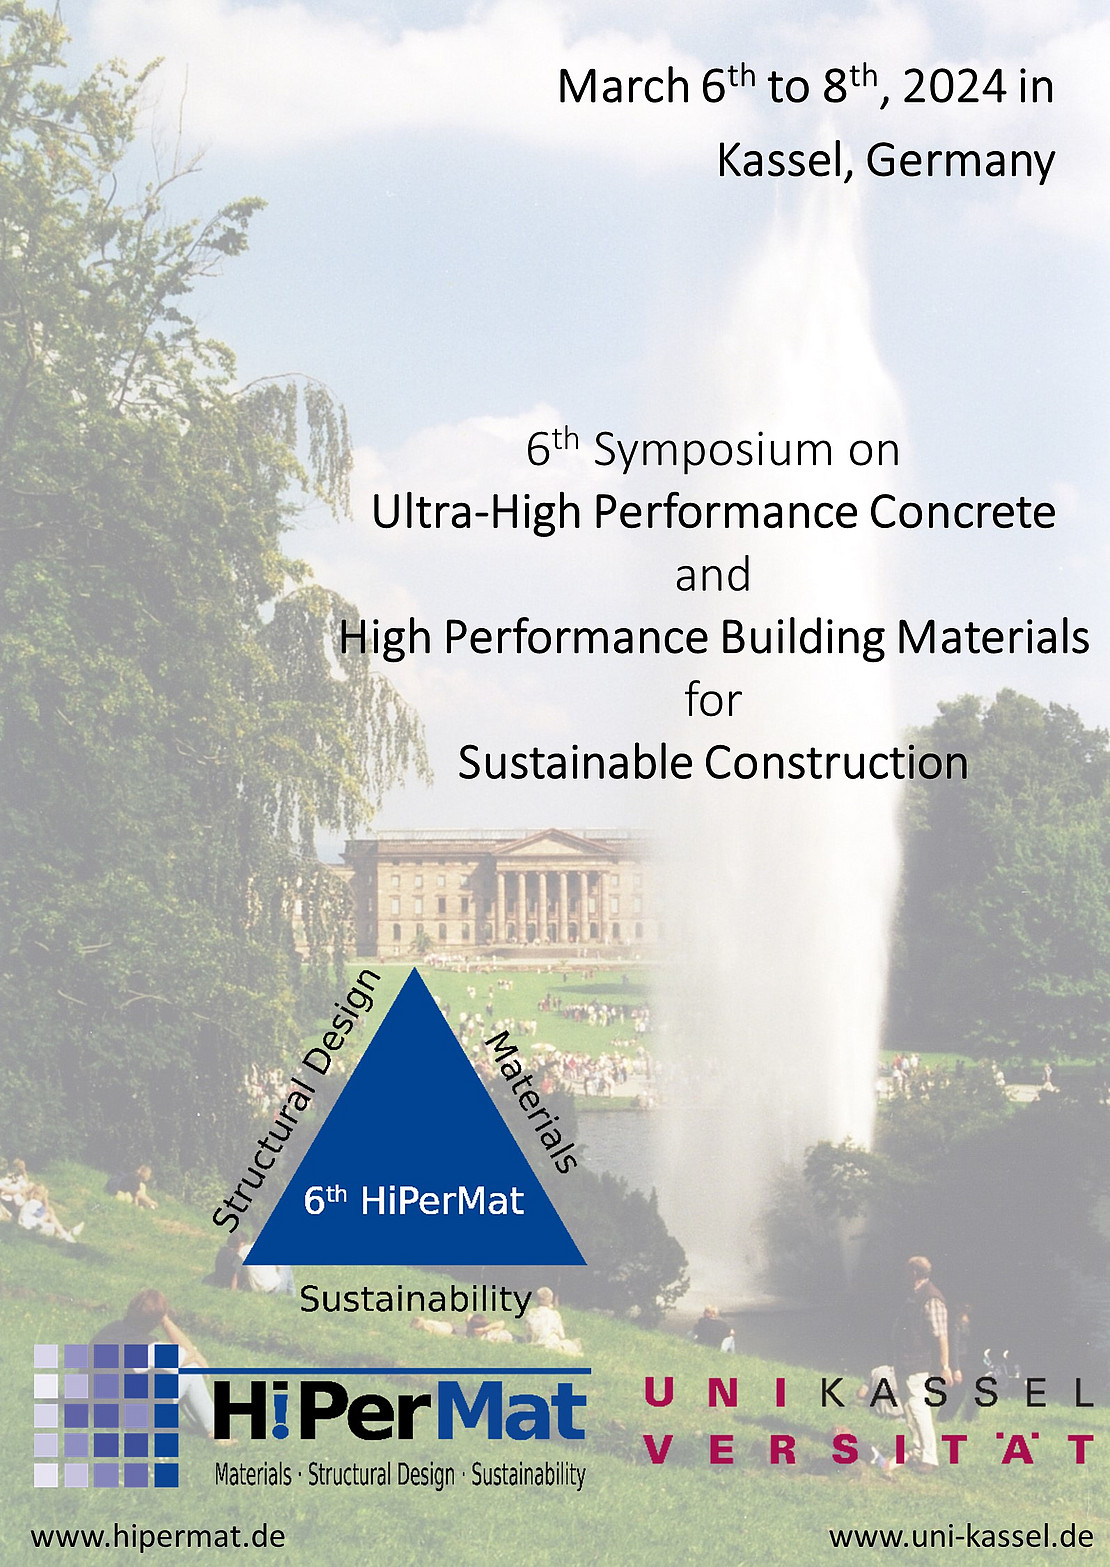 6th Symposium Ultra-High Performance Concrete and High Performance Building Materials for Sustainable Construction - March 6th to 8th, 2024 in Kassel, Germany